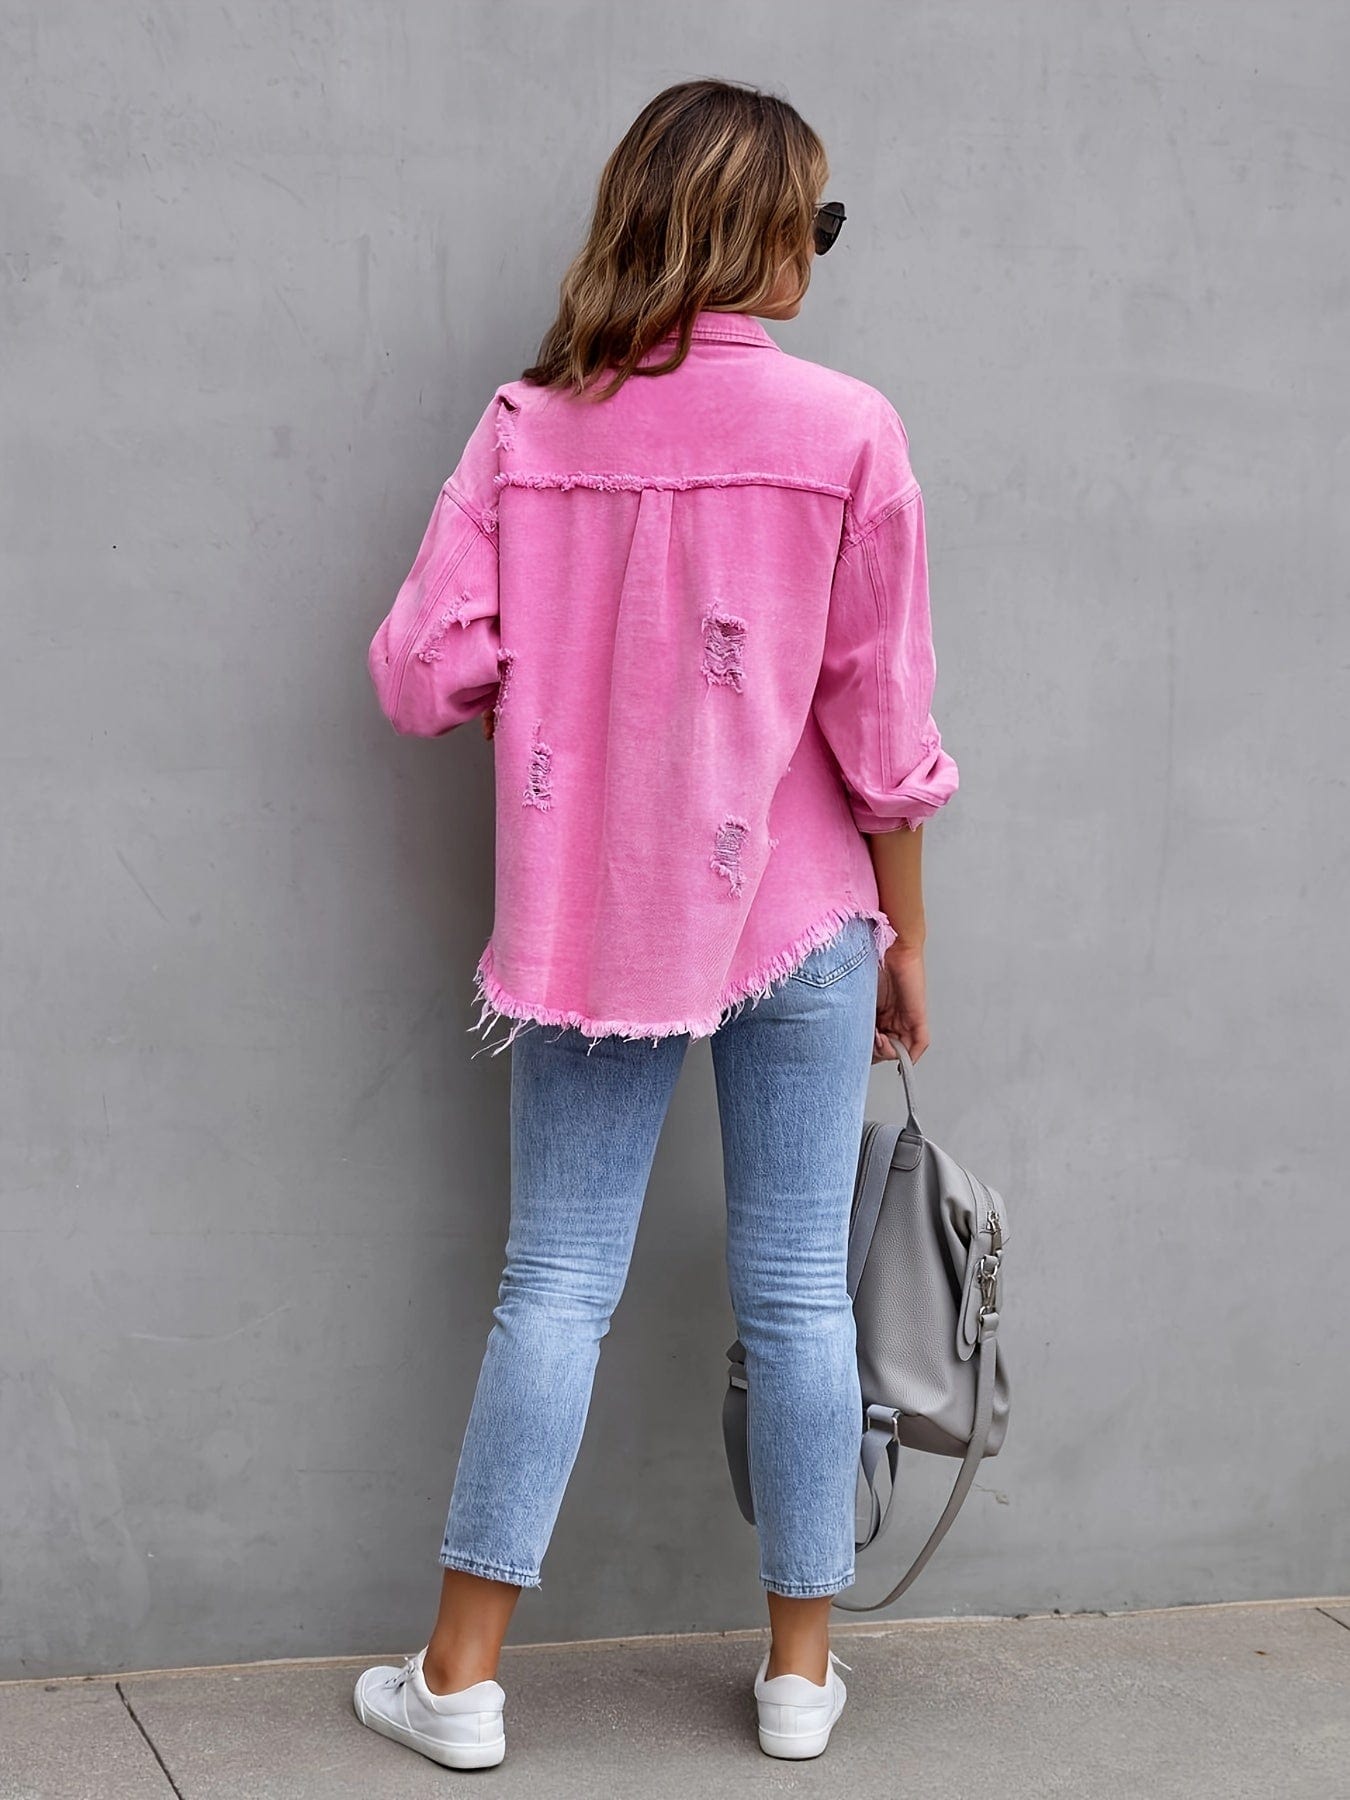 MsDressly Jackets Ripped Raw Edge Distressed Collar Single-Breasted Button-Up Long Sleeve Denim Jacket